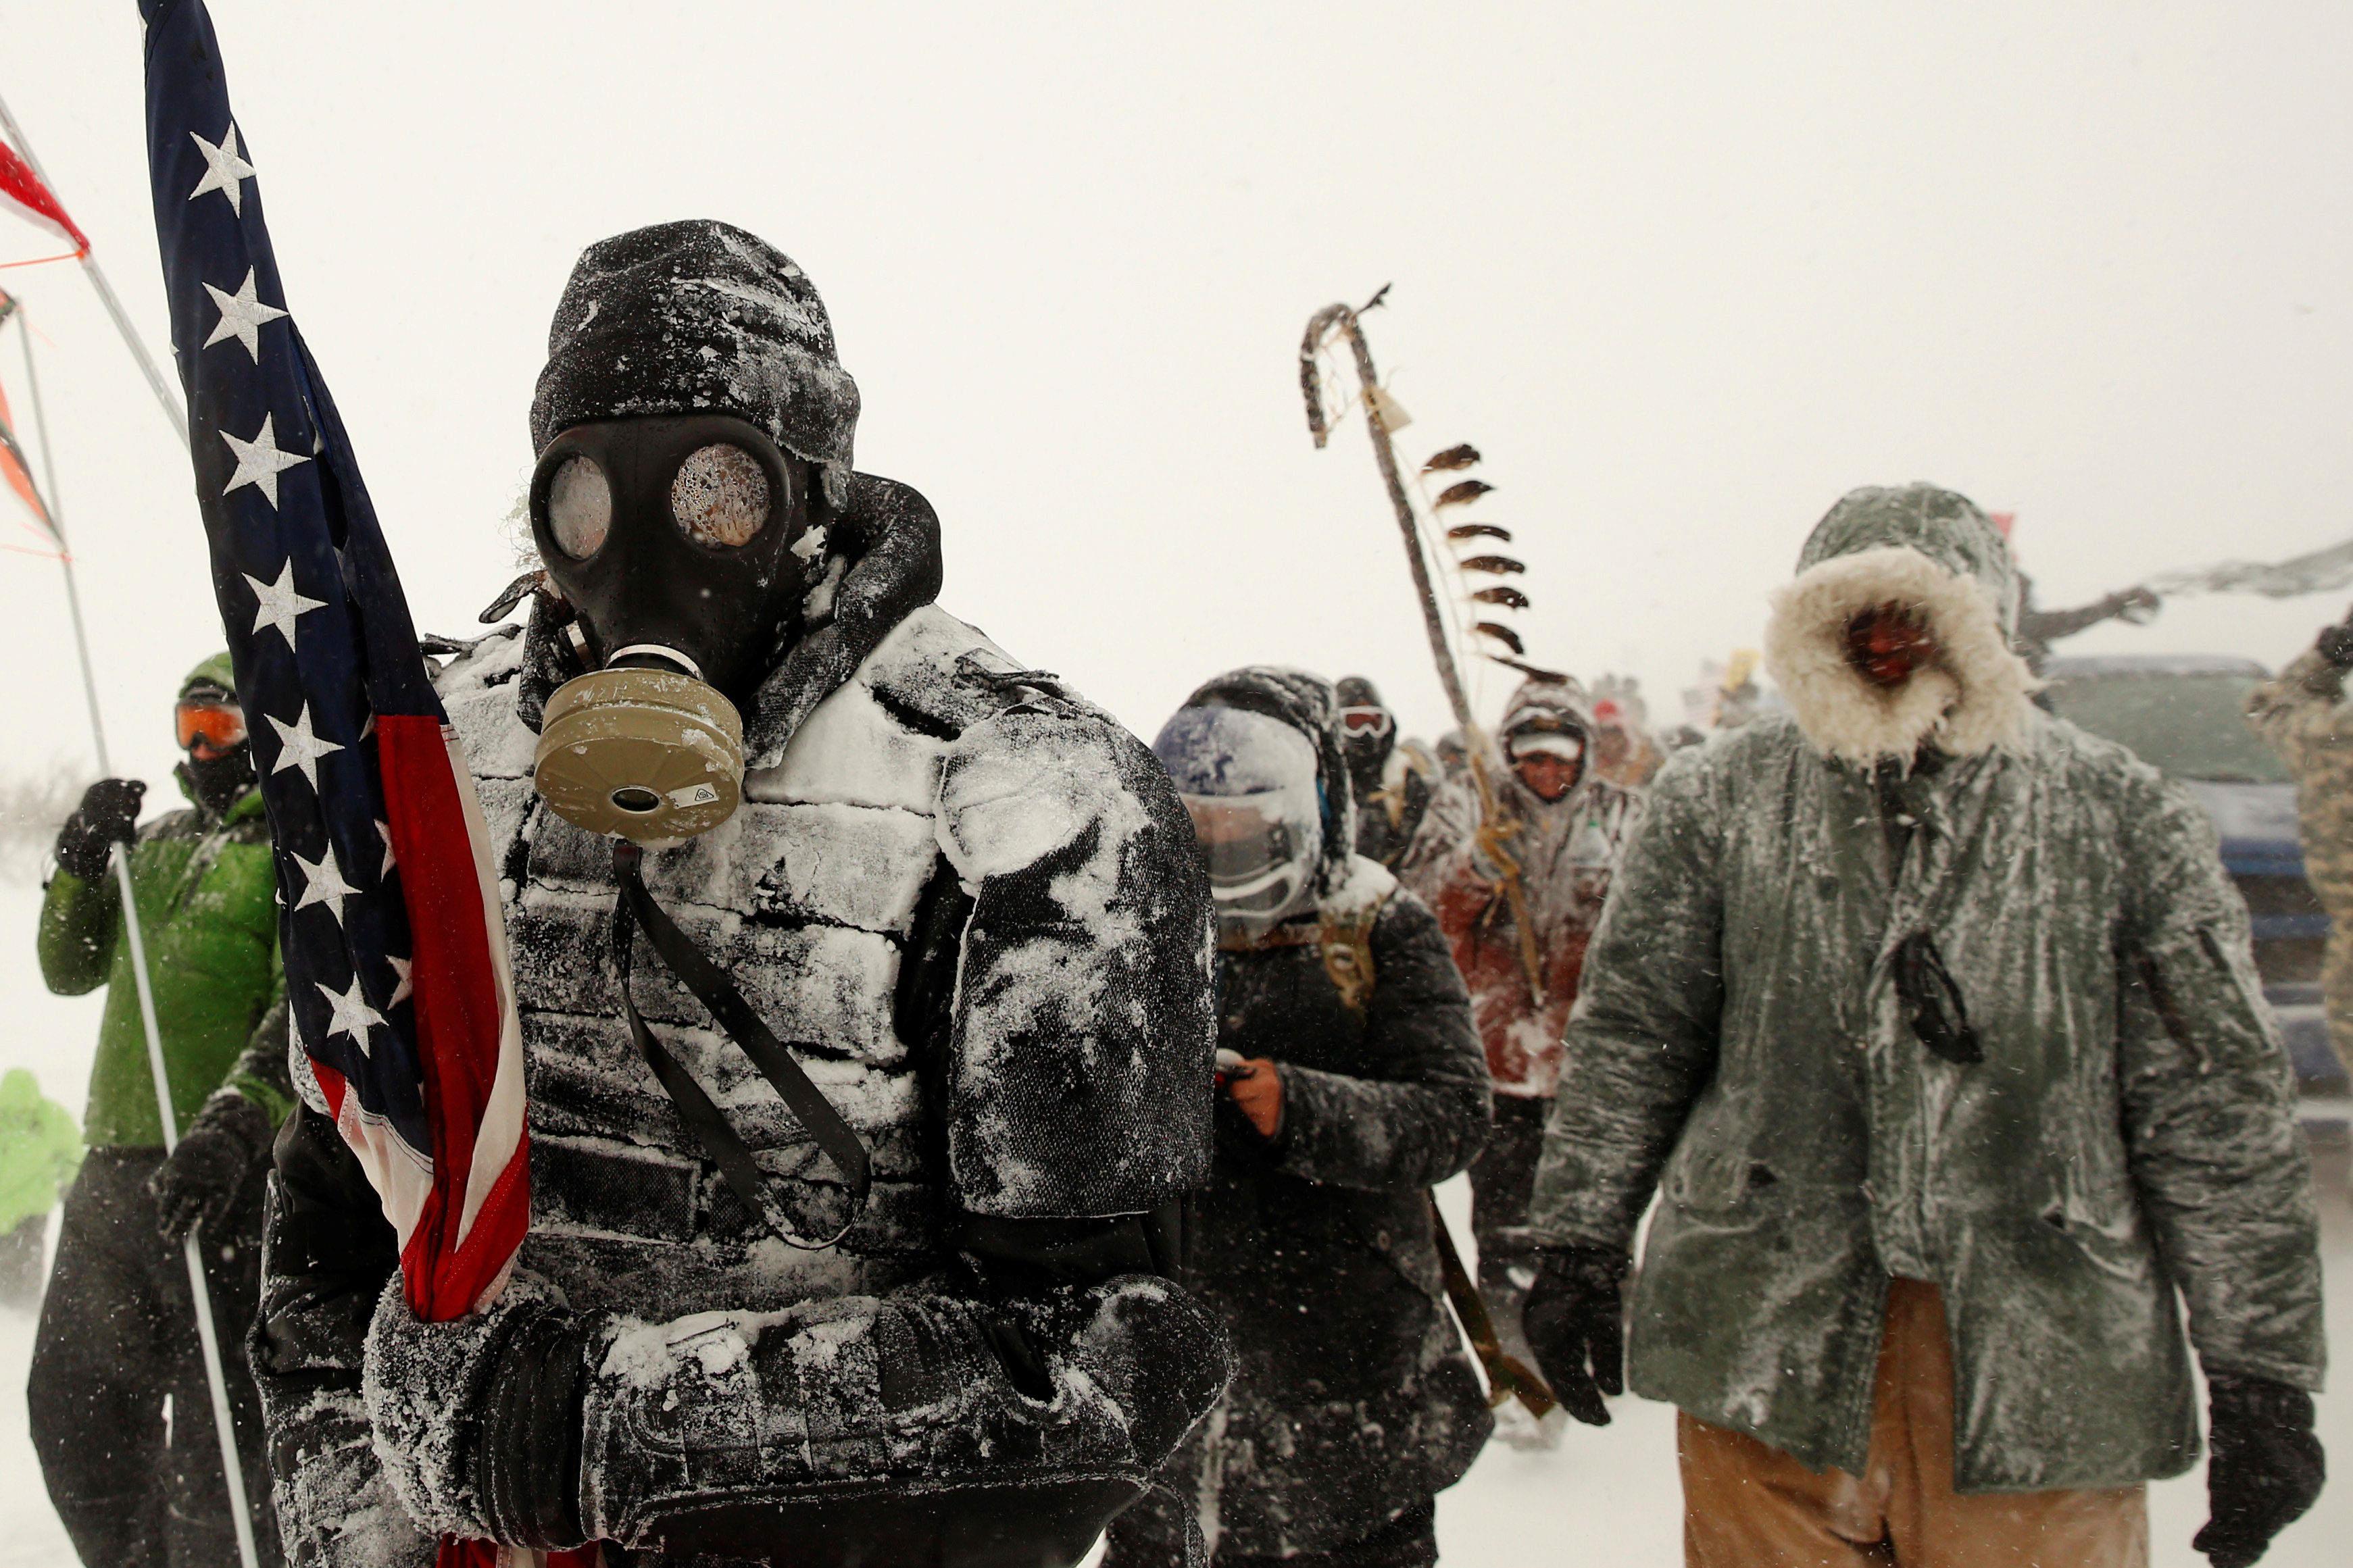 A man takes part in a march with veterans to Backwater Bridge just outside of the Oceti Sakowin camp